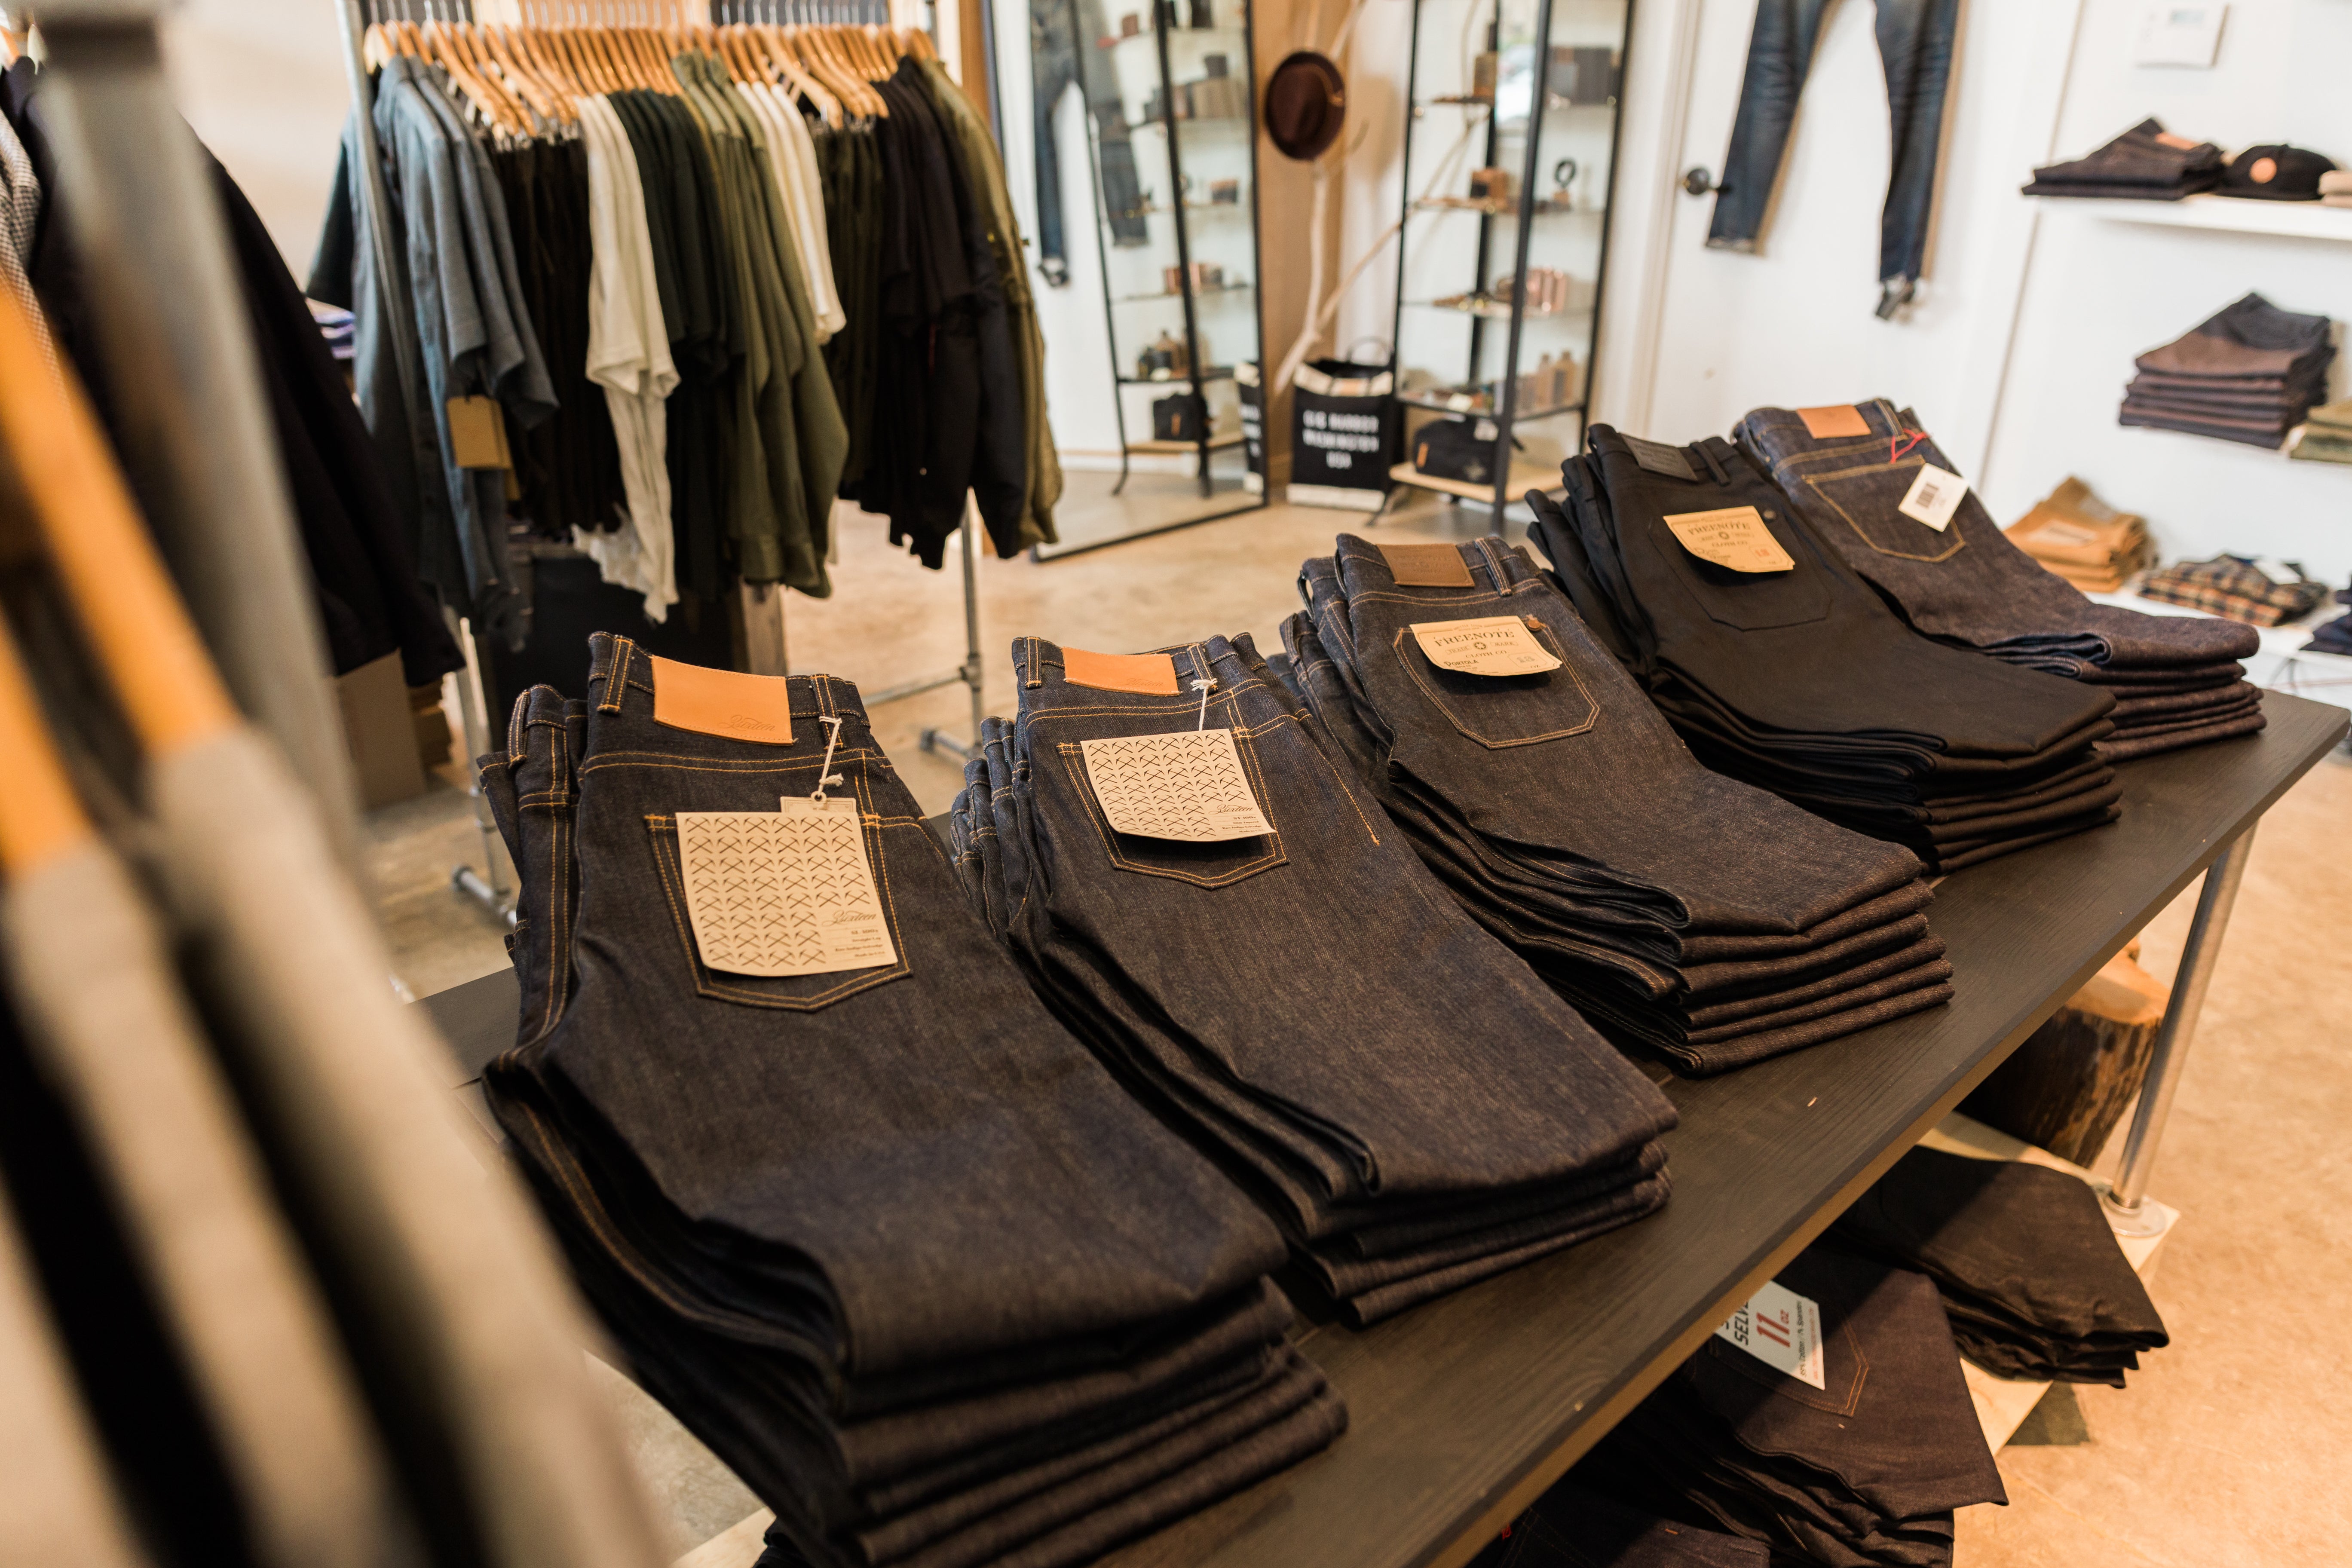 Selection of jeans on a display table.